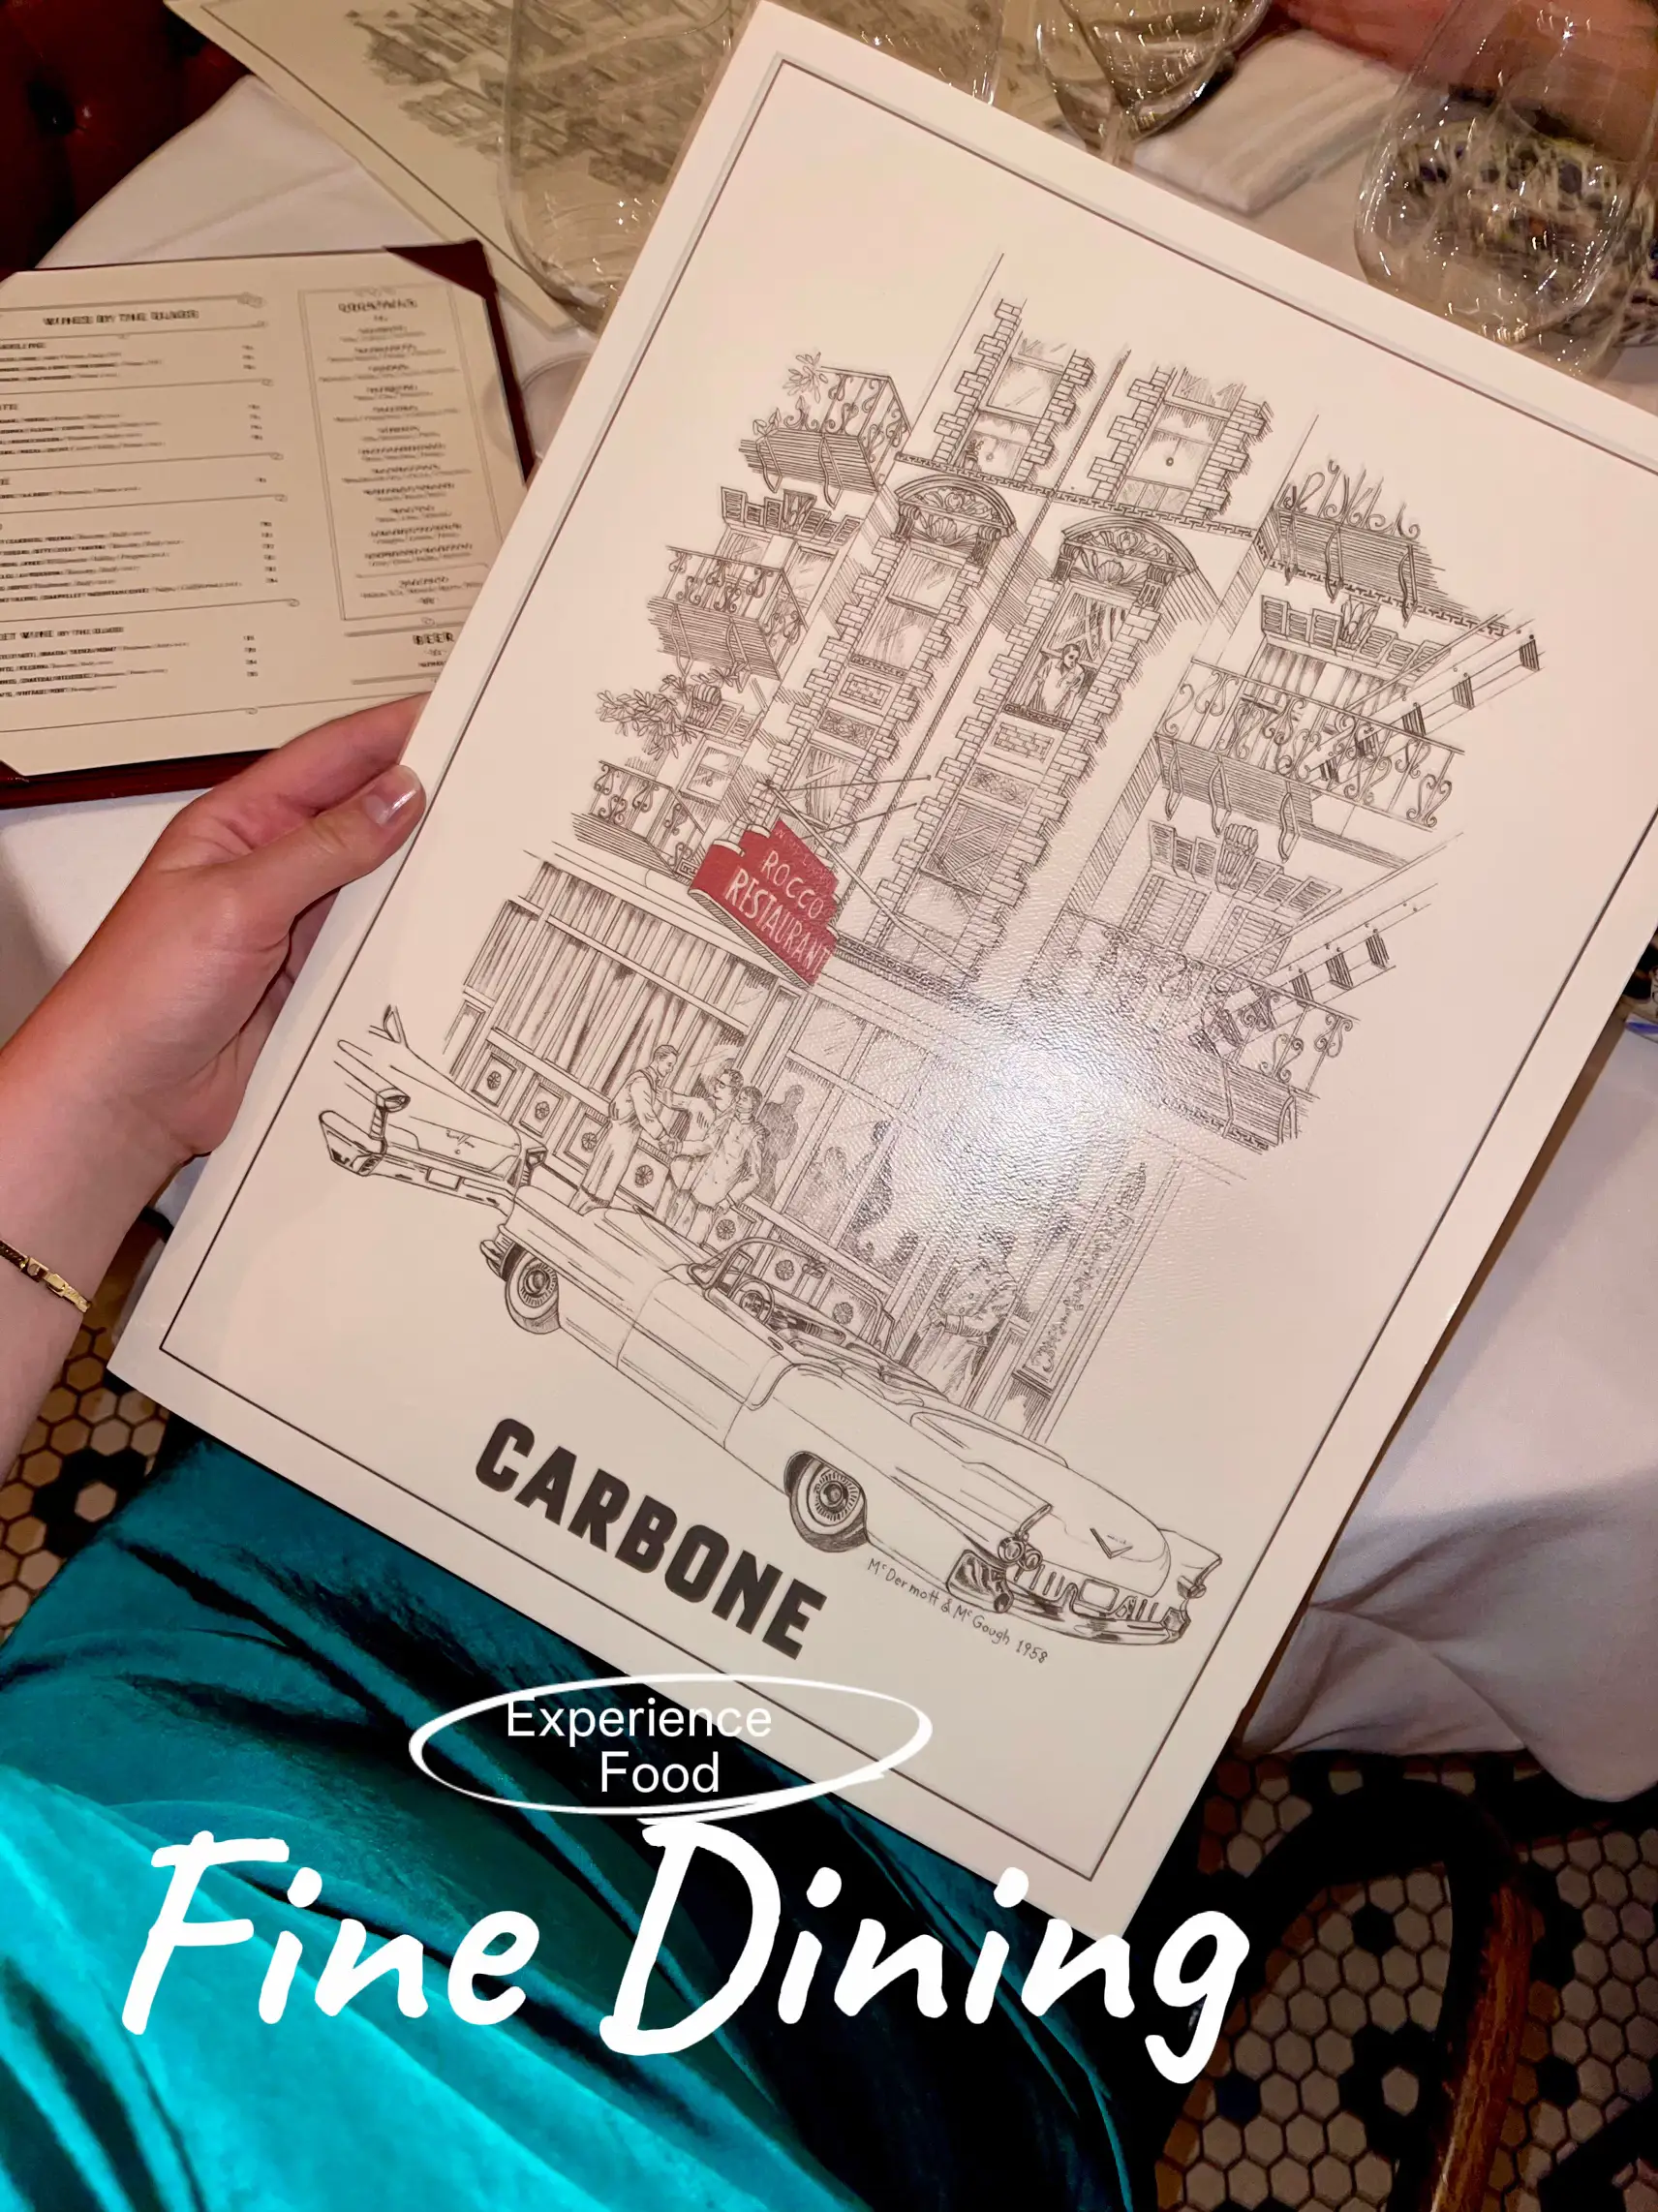  A person is holding a map of a city with the words "Experience Food Dining Fine" on top.